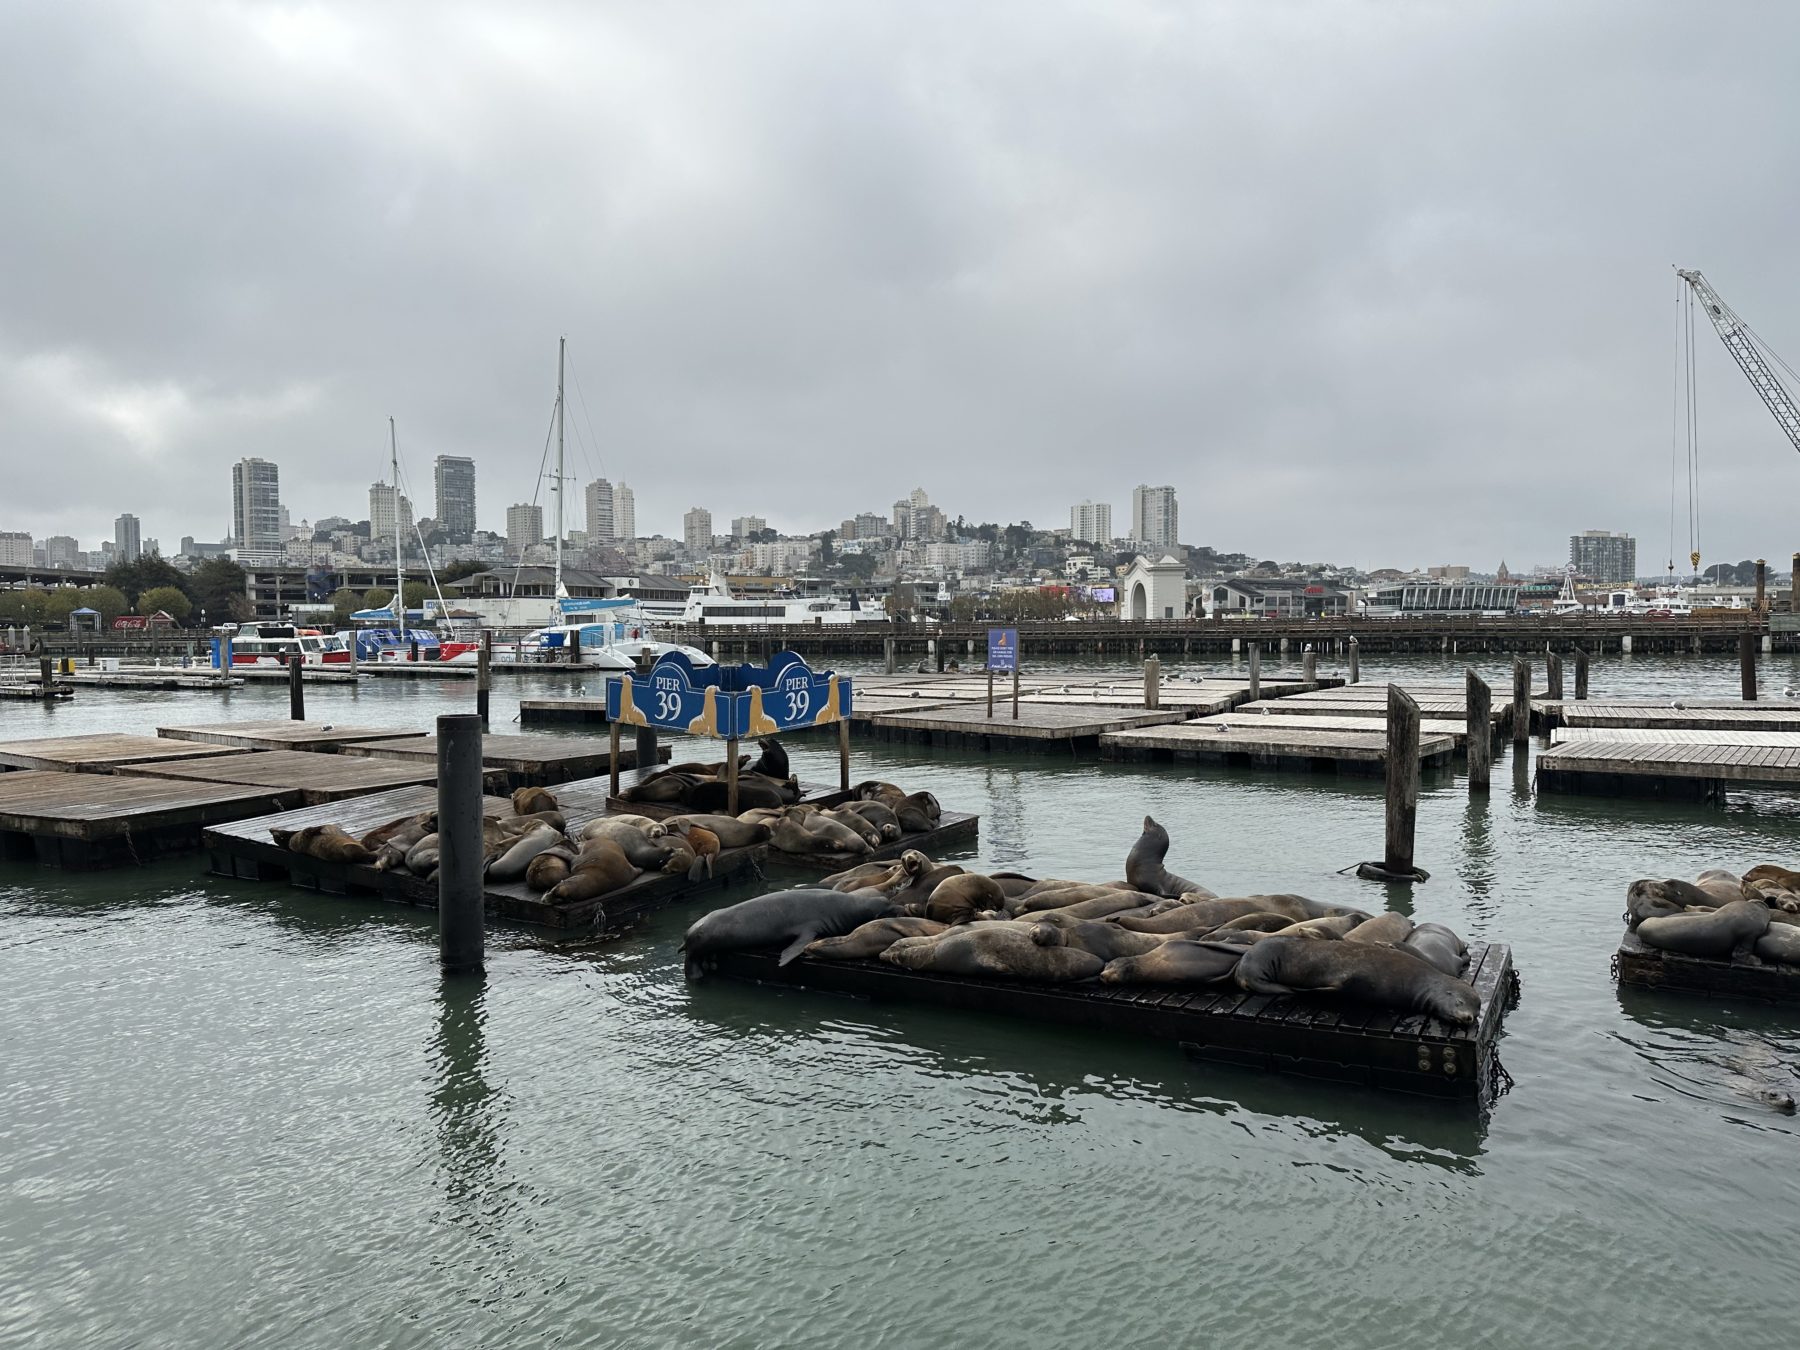 Fun Things To Do On Pier 39 (Best Pier 39 Attractions!) – Planning